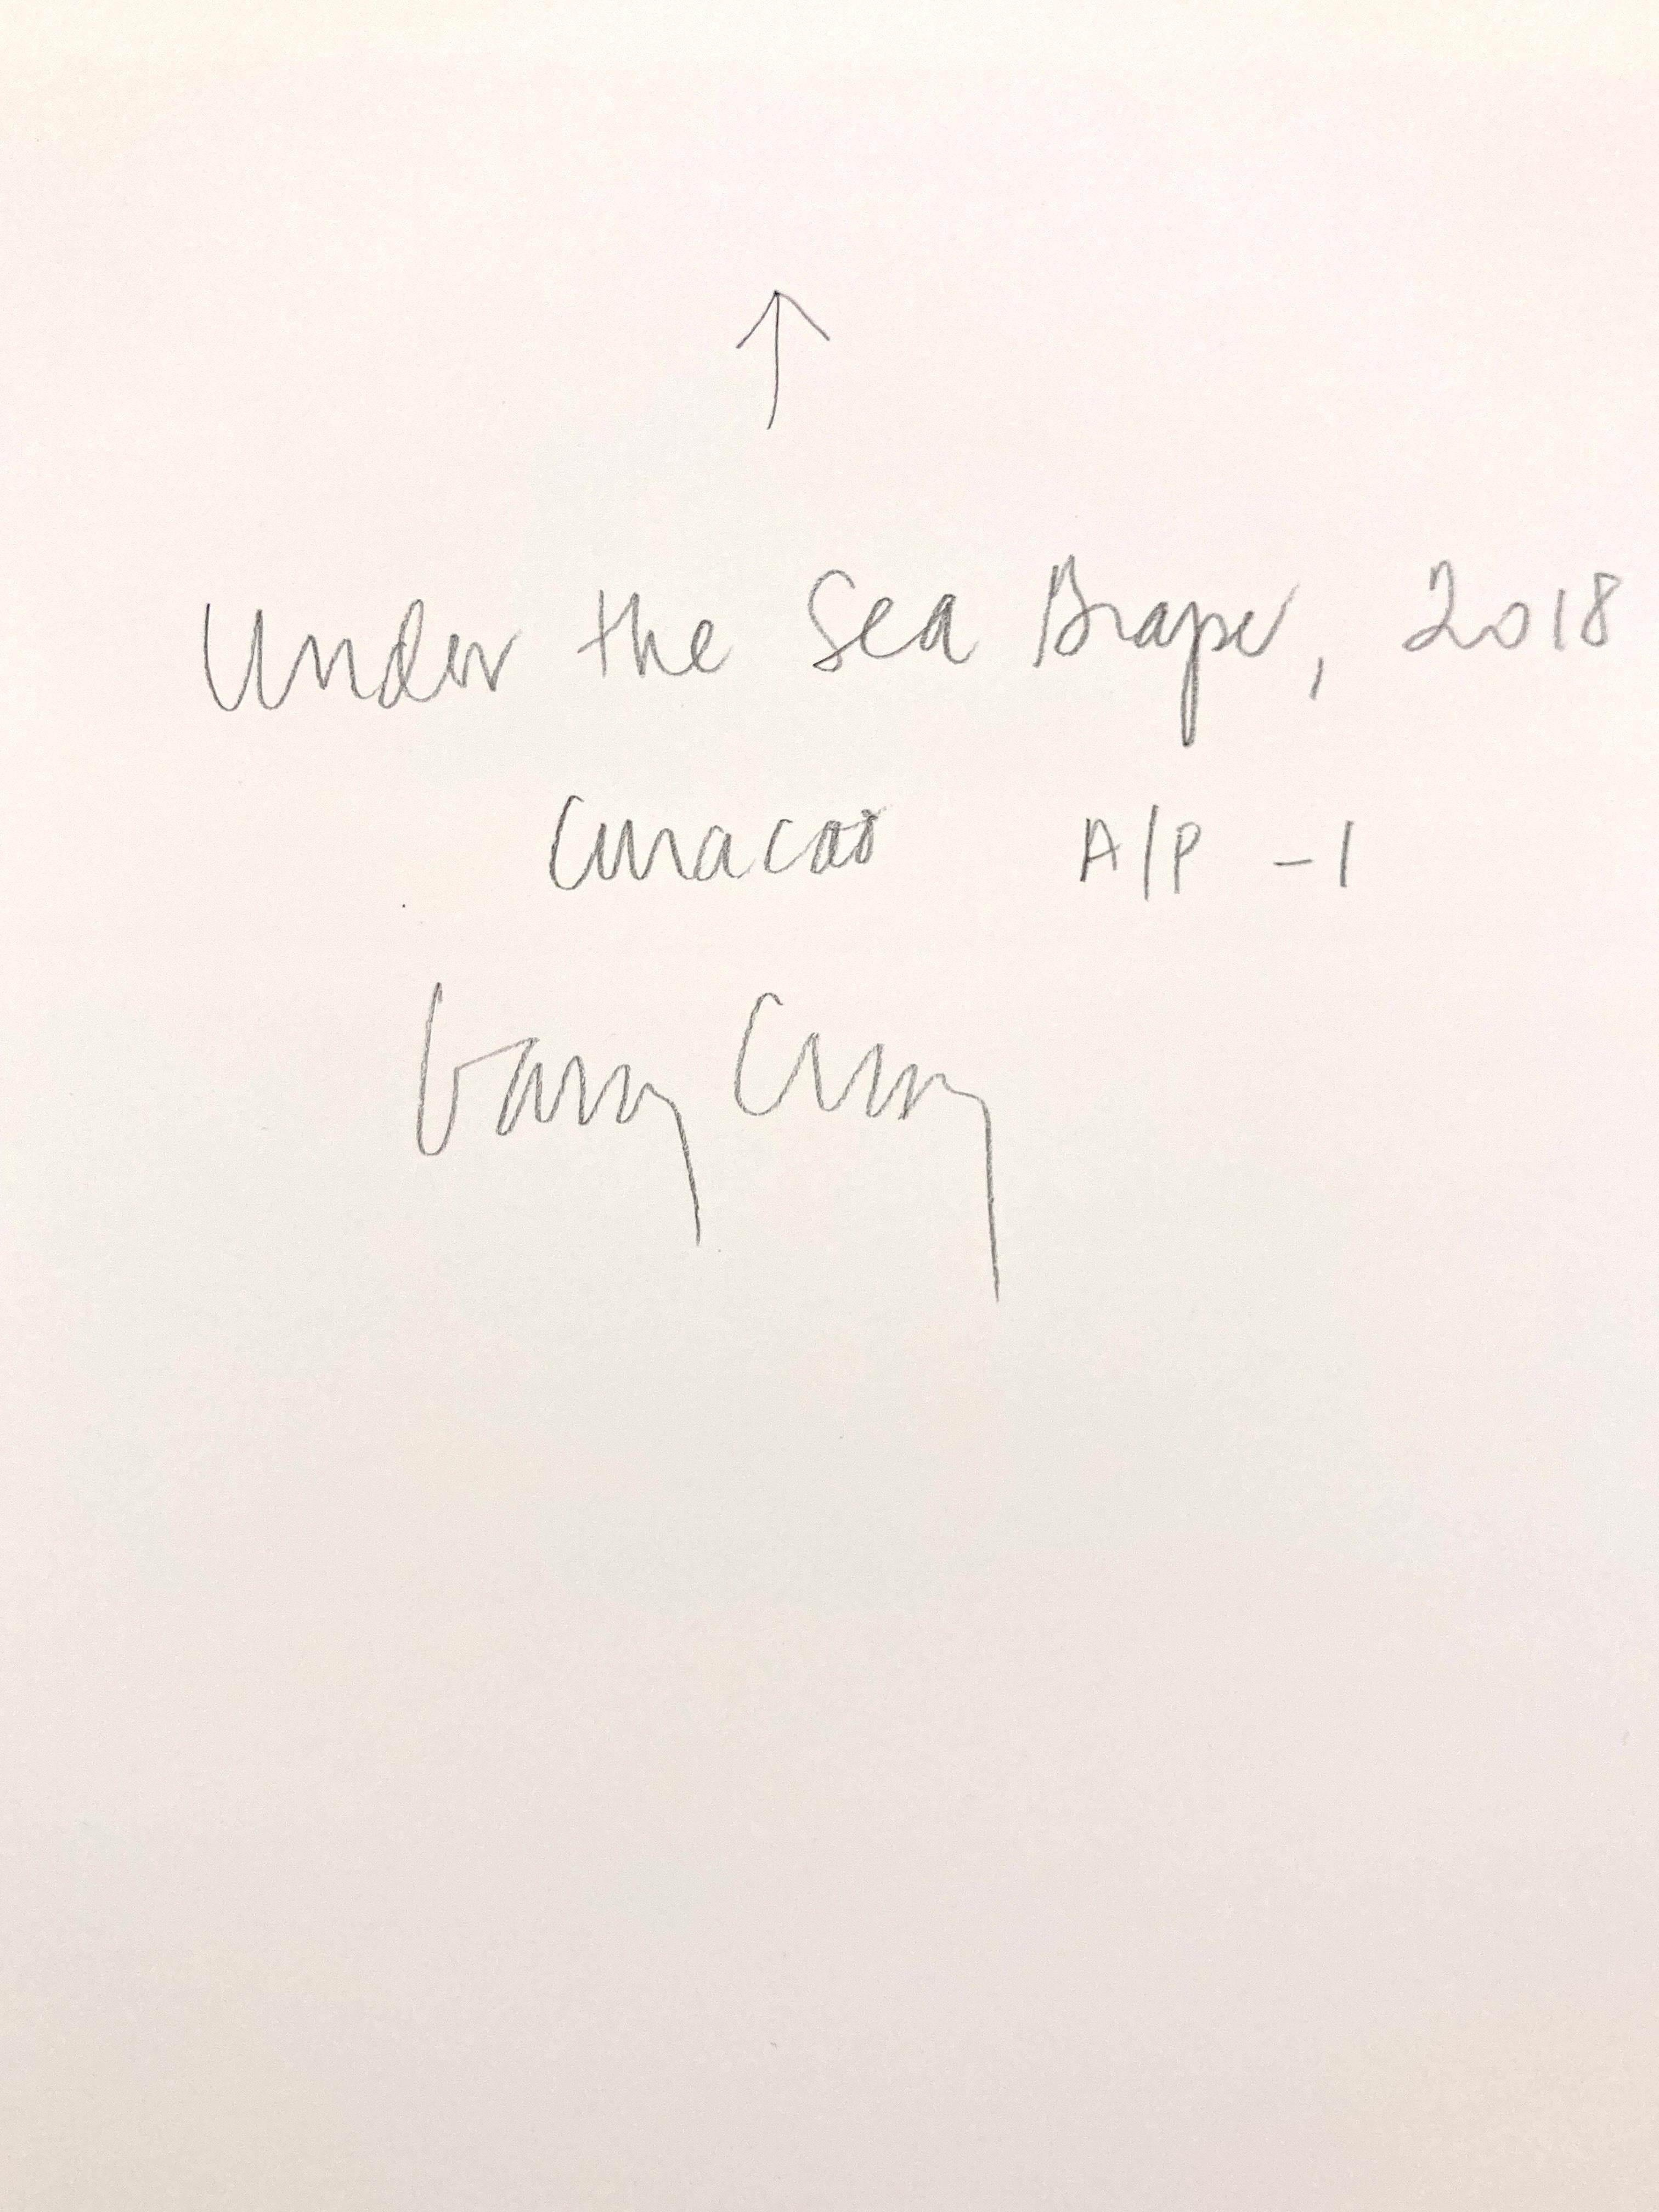 Under the Sea Grape, 2018 is part of the artist's 